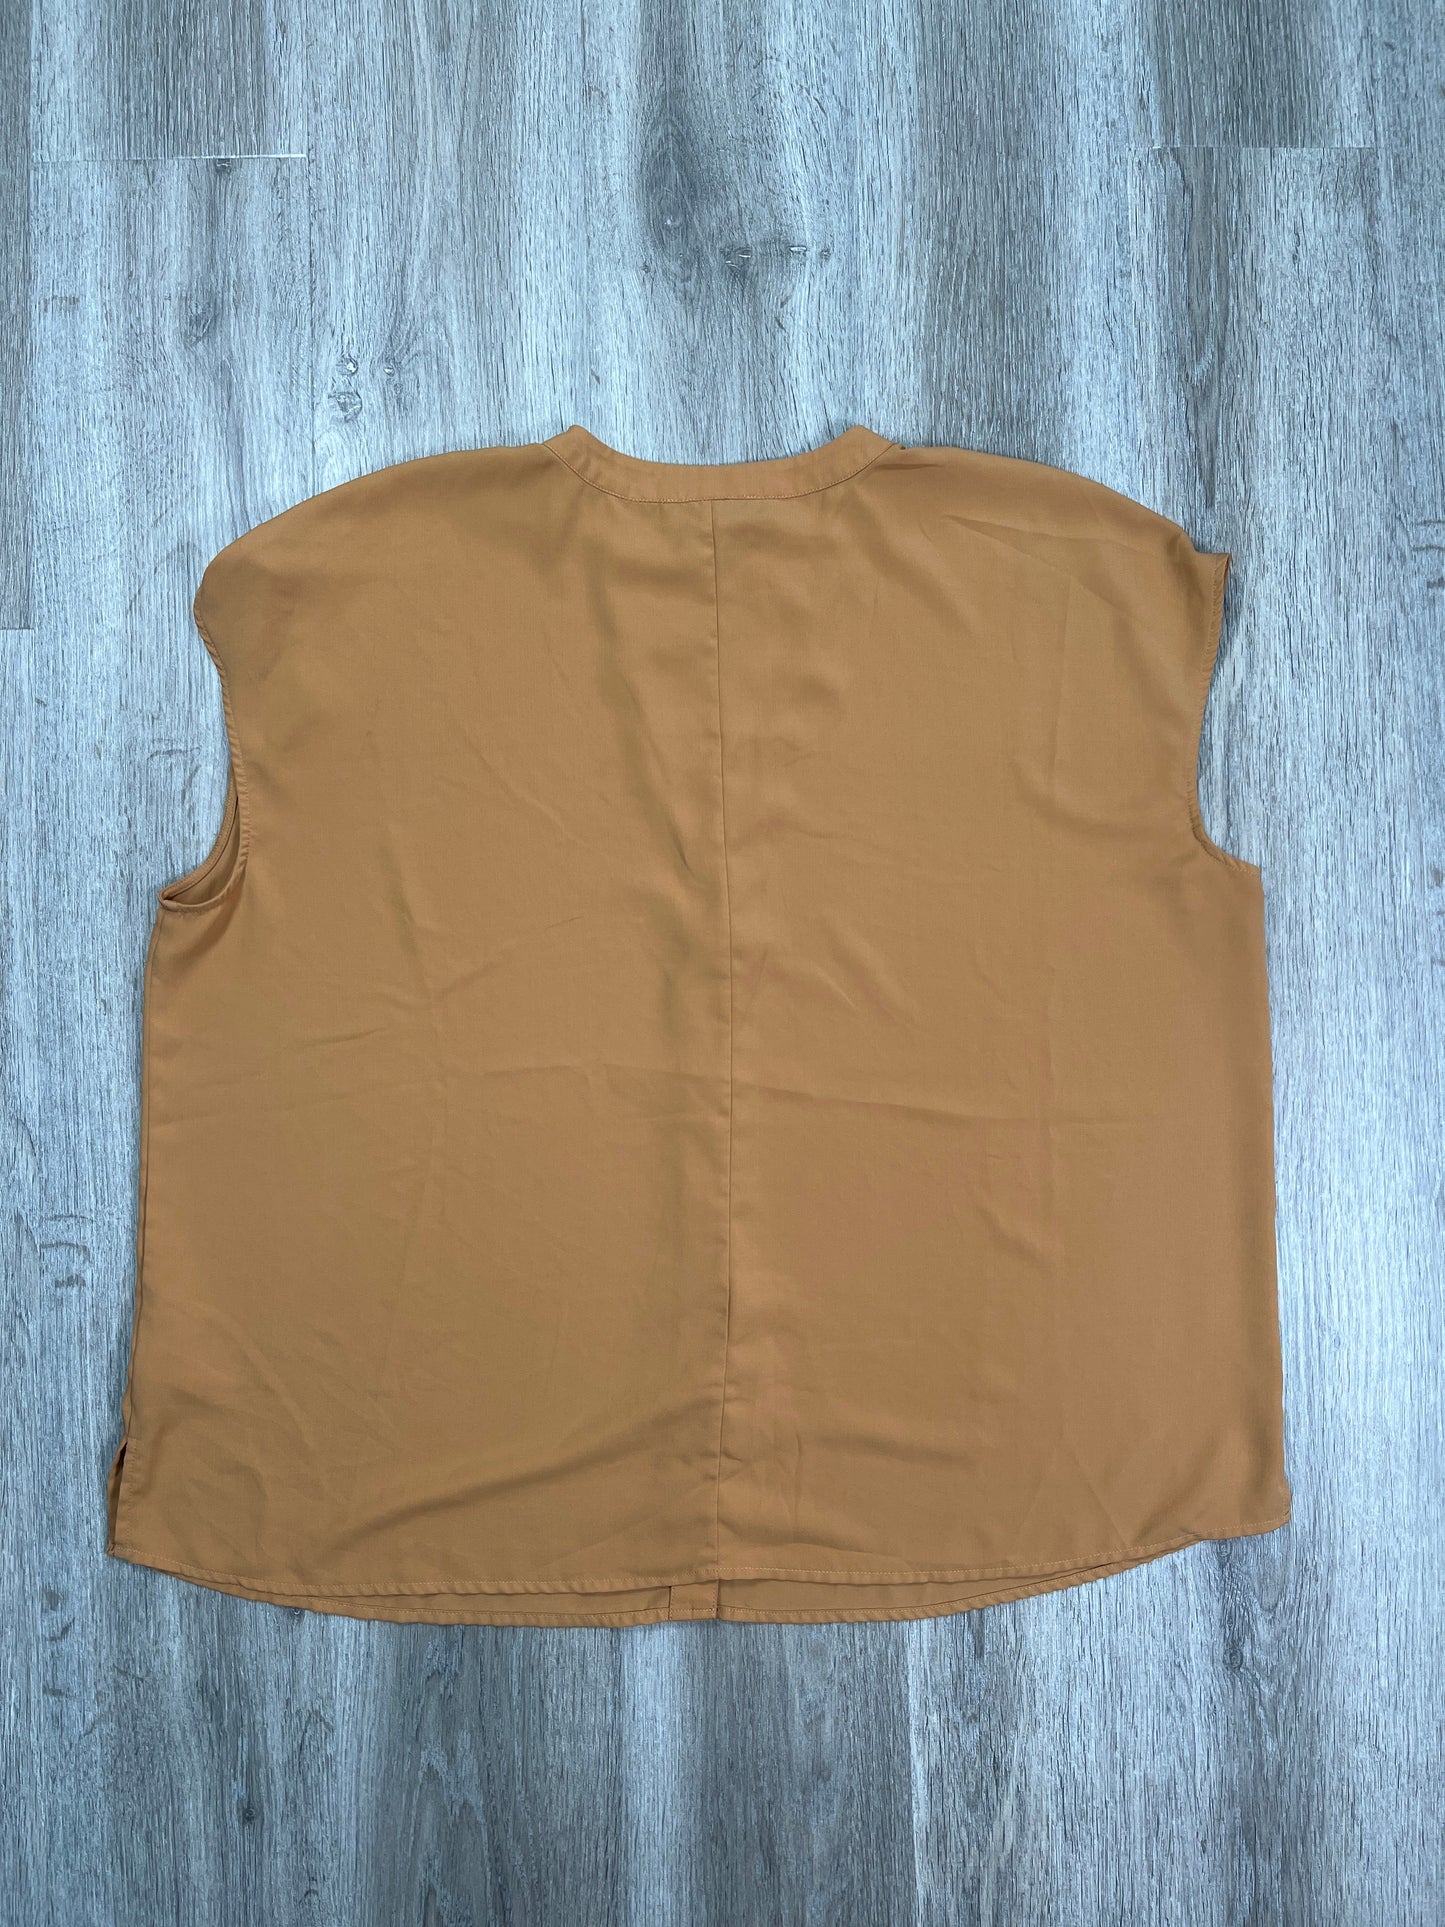 Top Short Sleeve By Eloquii  Size: 2x